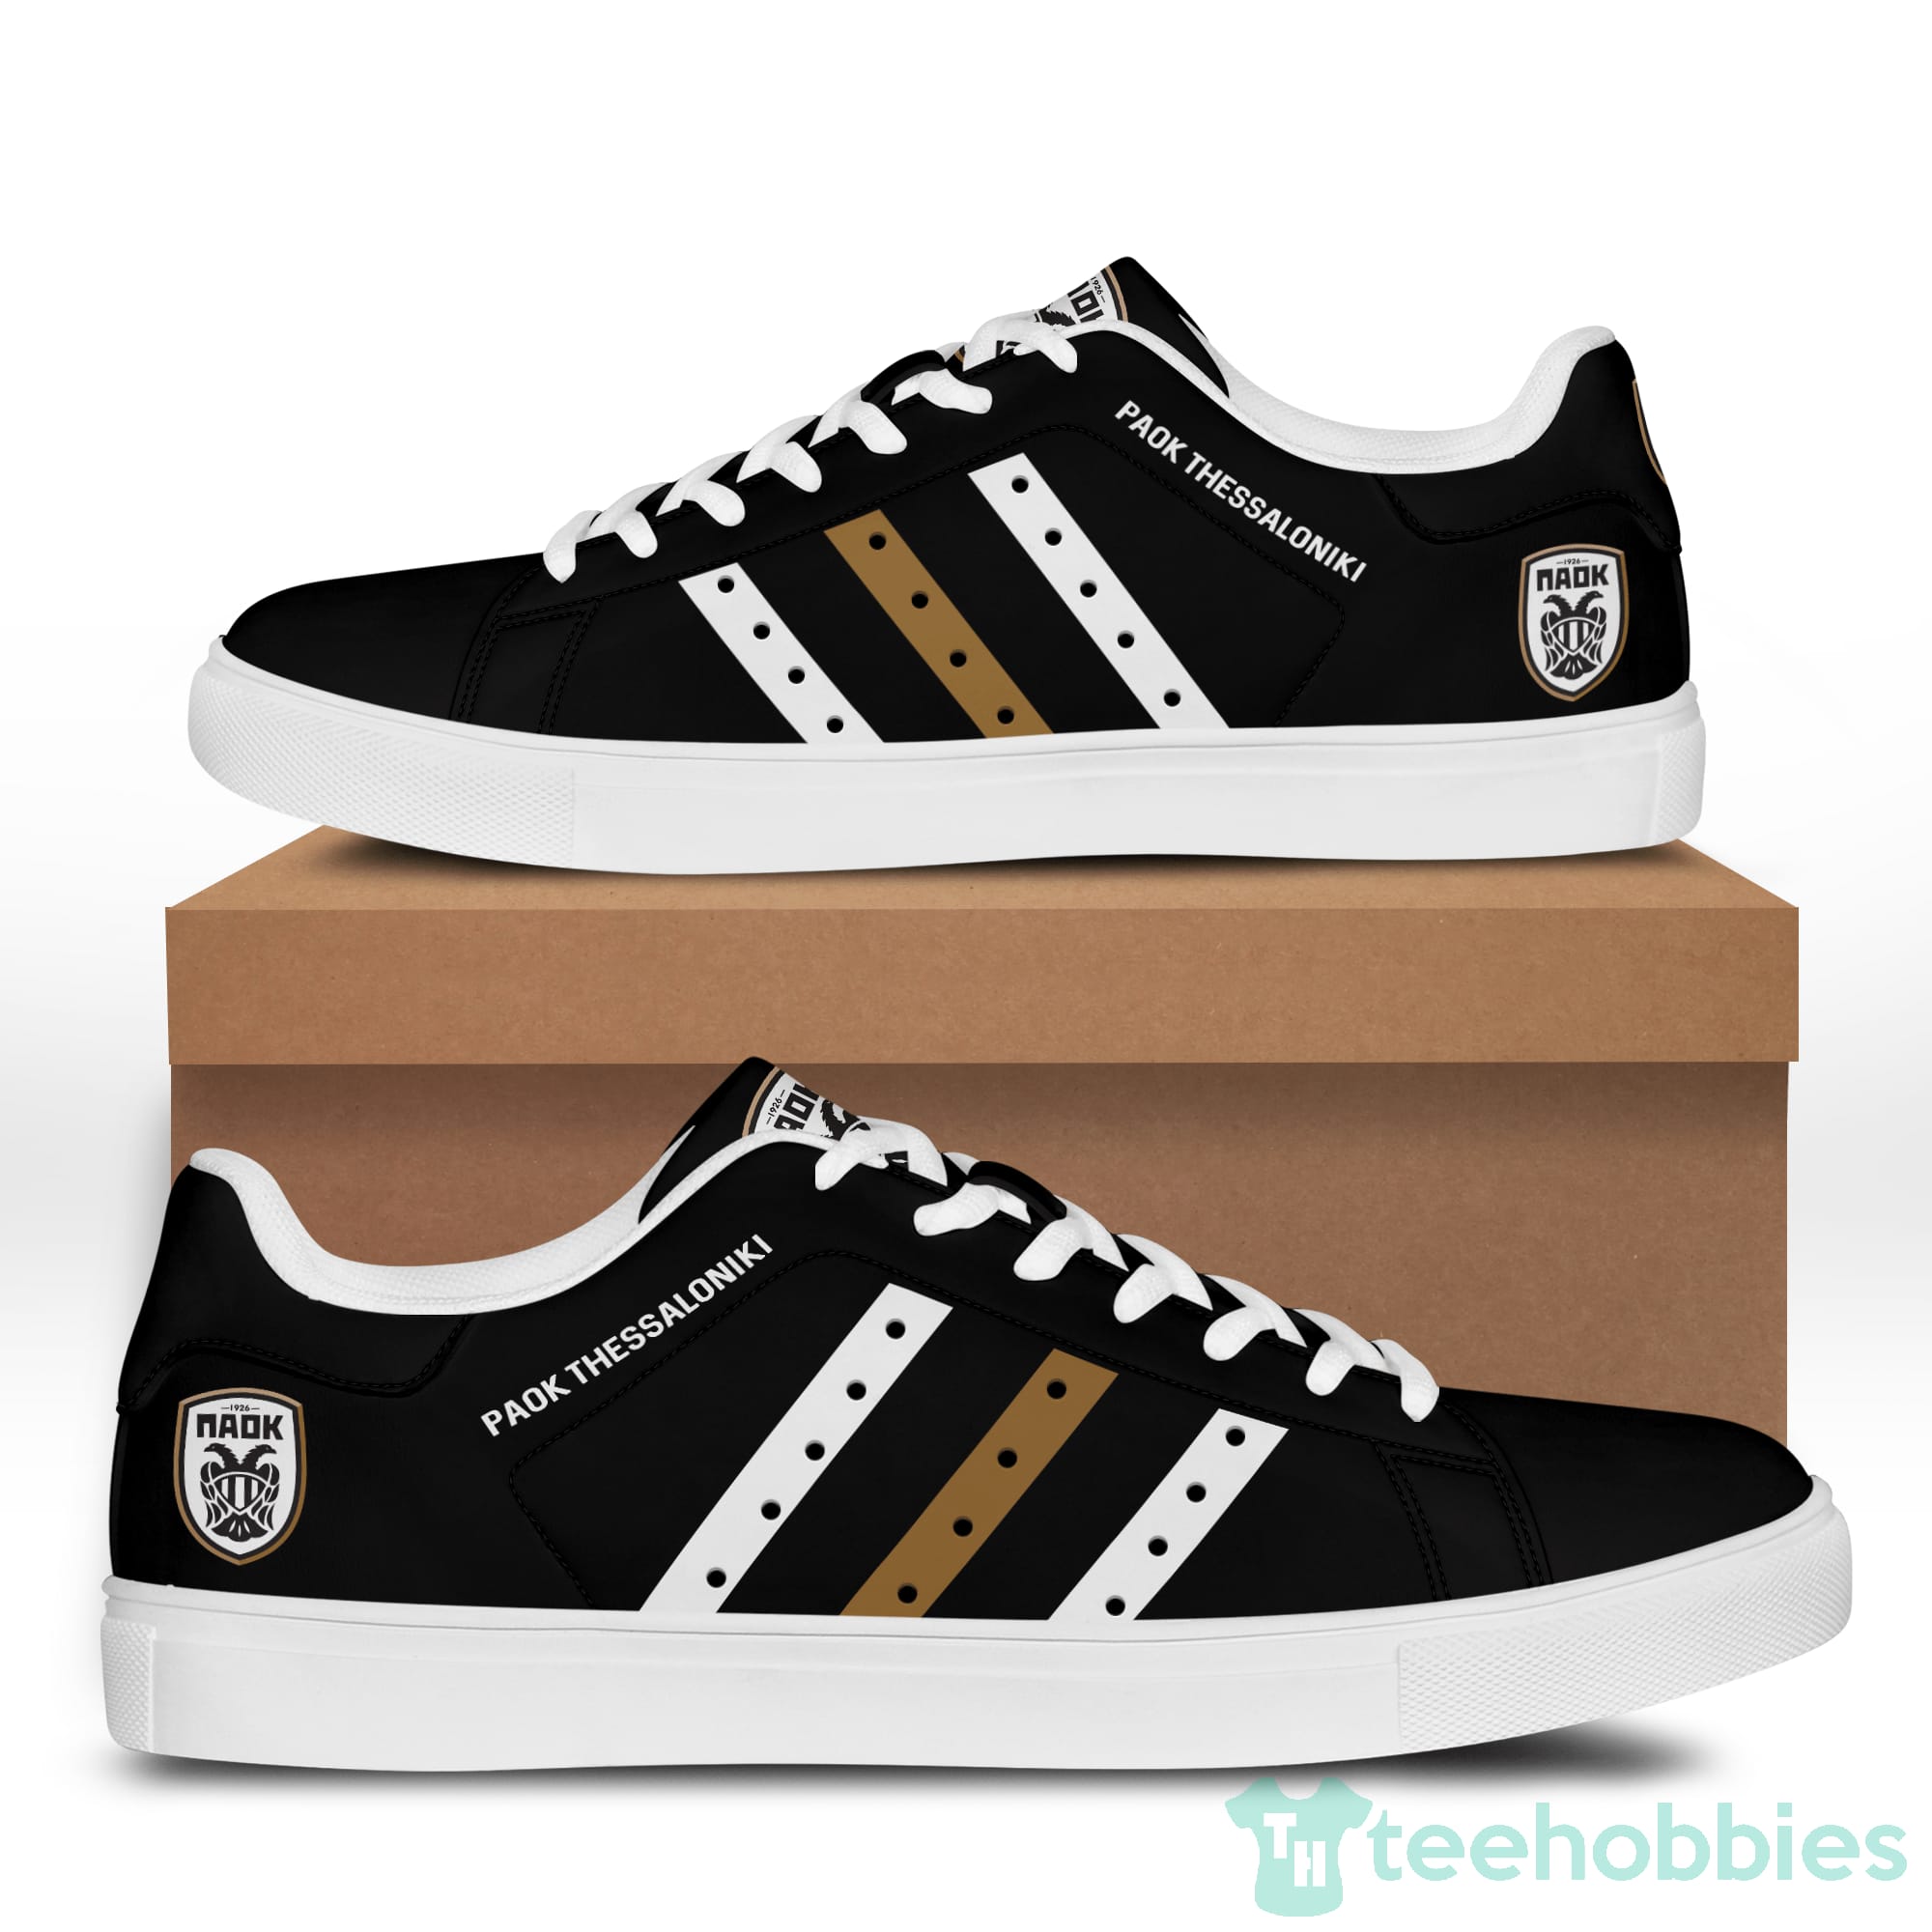 Paok Thessaloni Fc Fans Black Low Top Skate Shoes Product photo 1